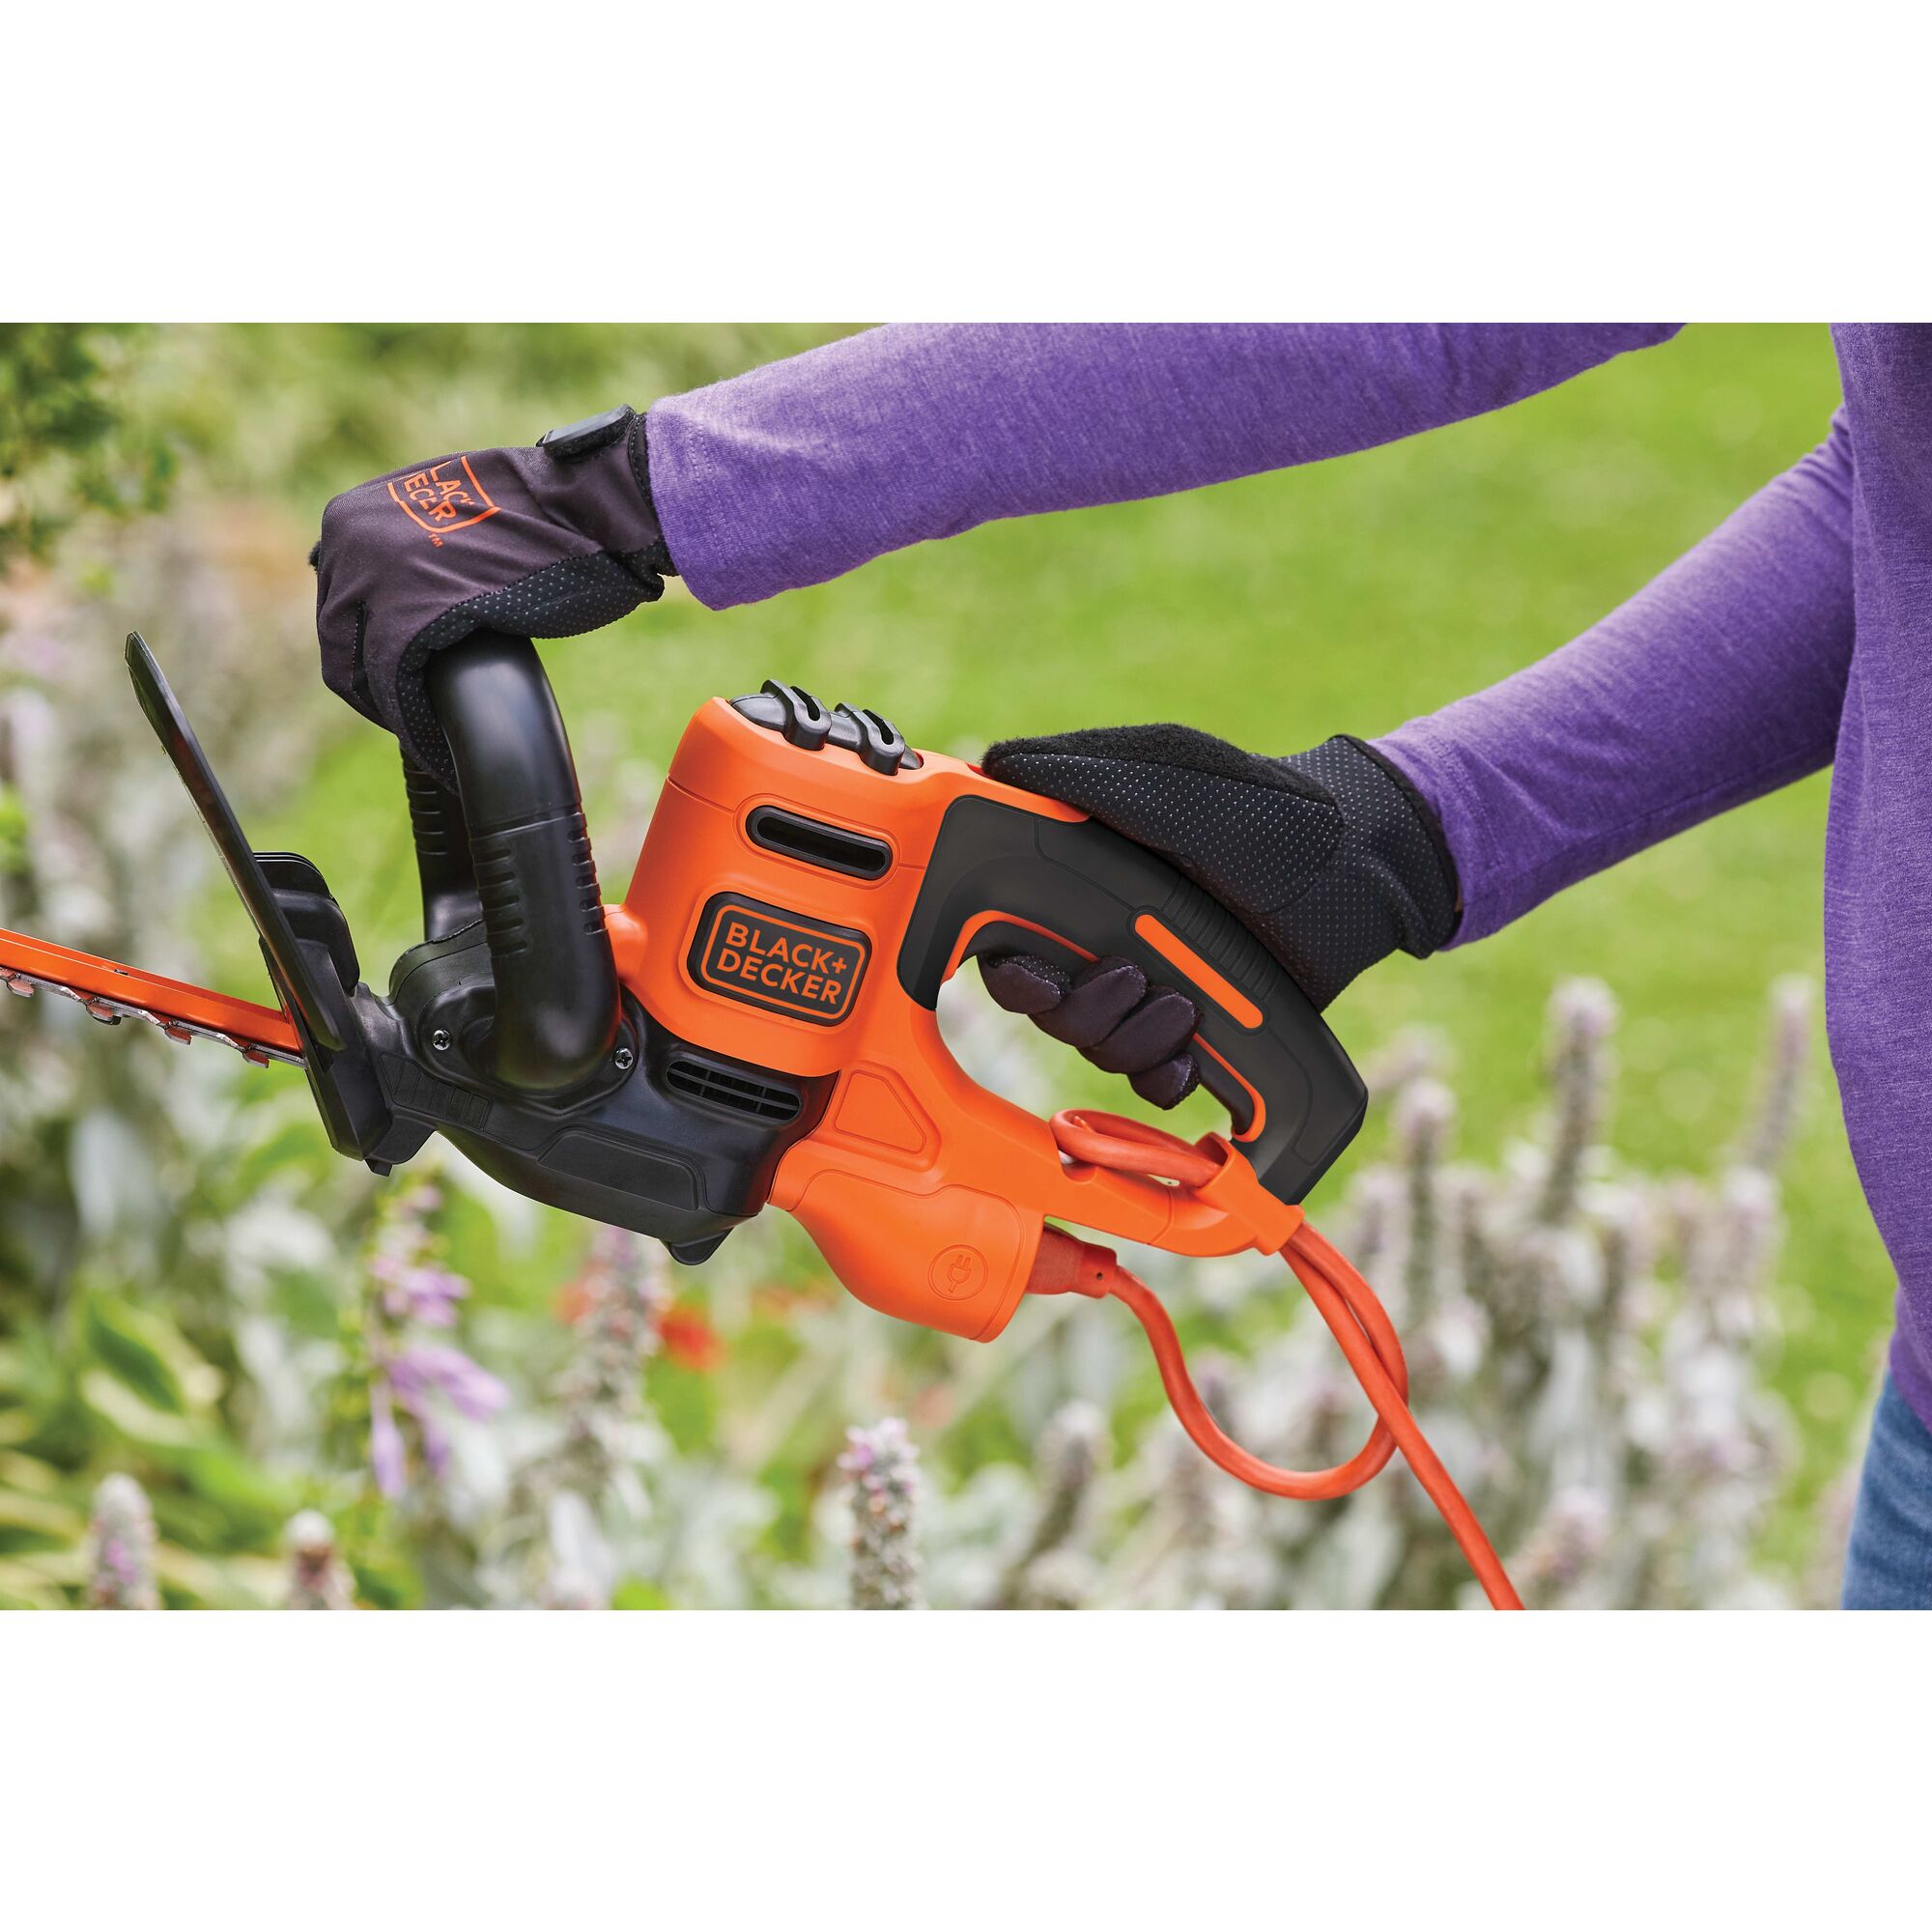 Full wrap around front handle feature of 22 inch Electric hedge trimmer.\n